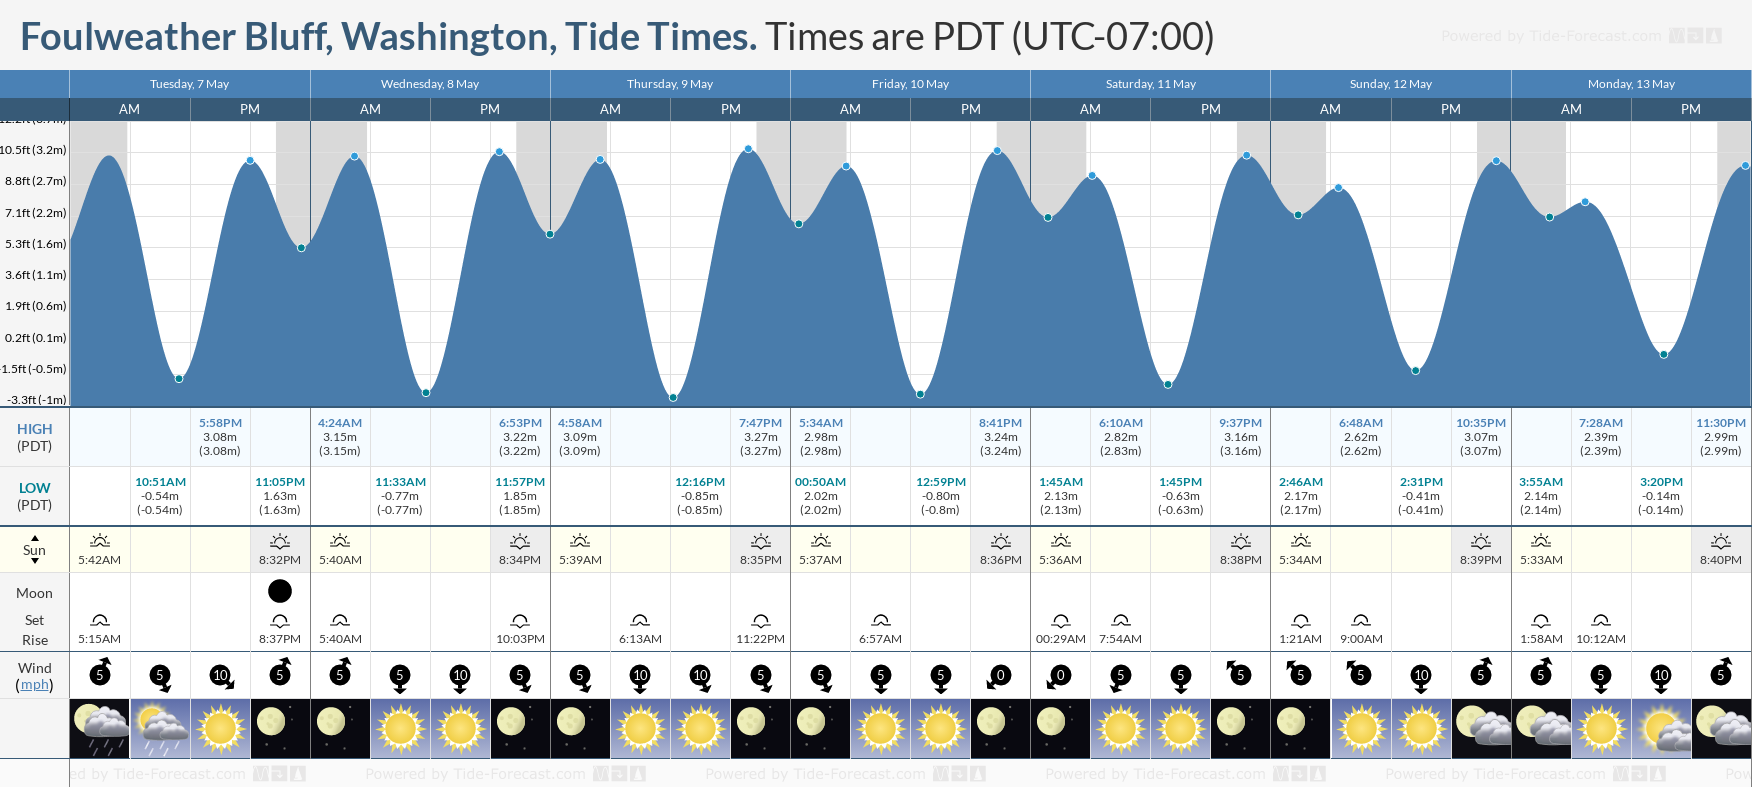 Foulweather Bluff, Washington Tide Chart including high and low tide tide times for the next 7 days